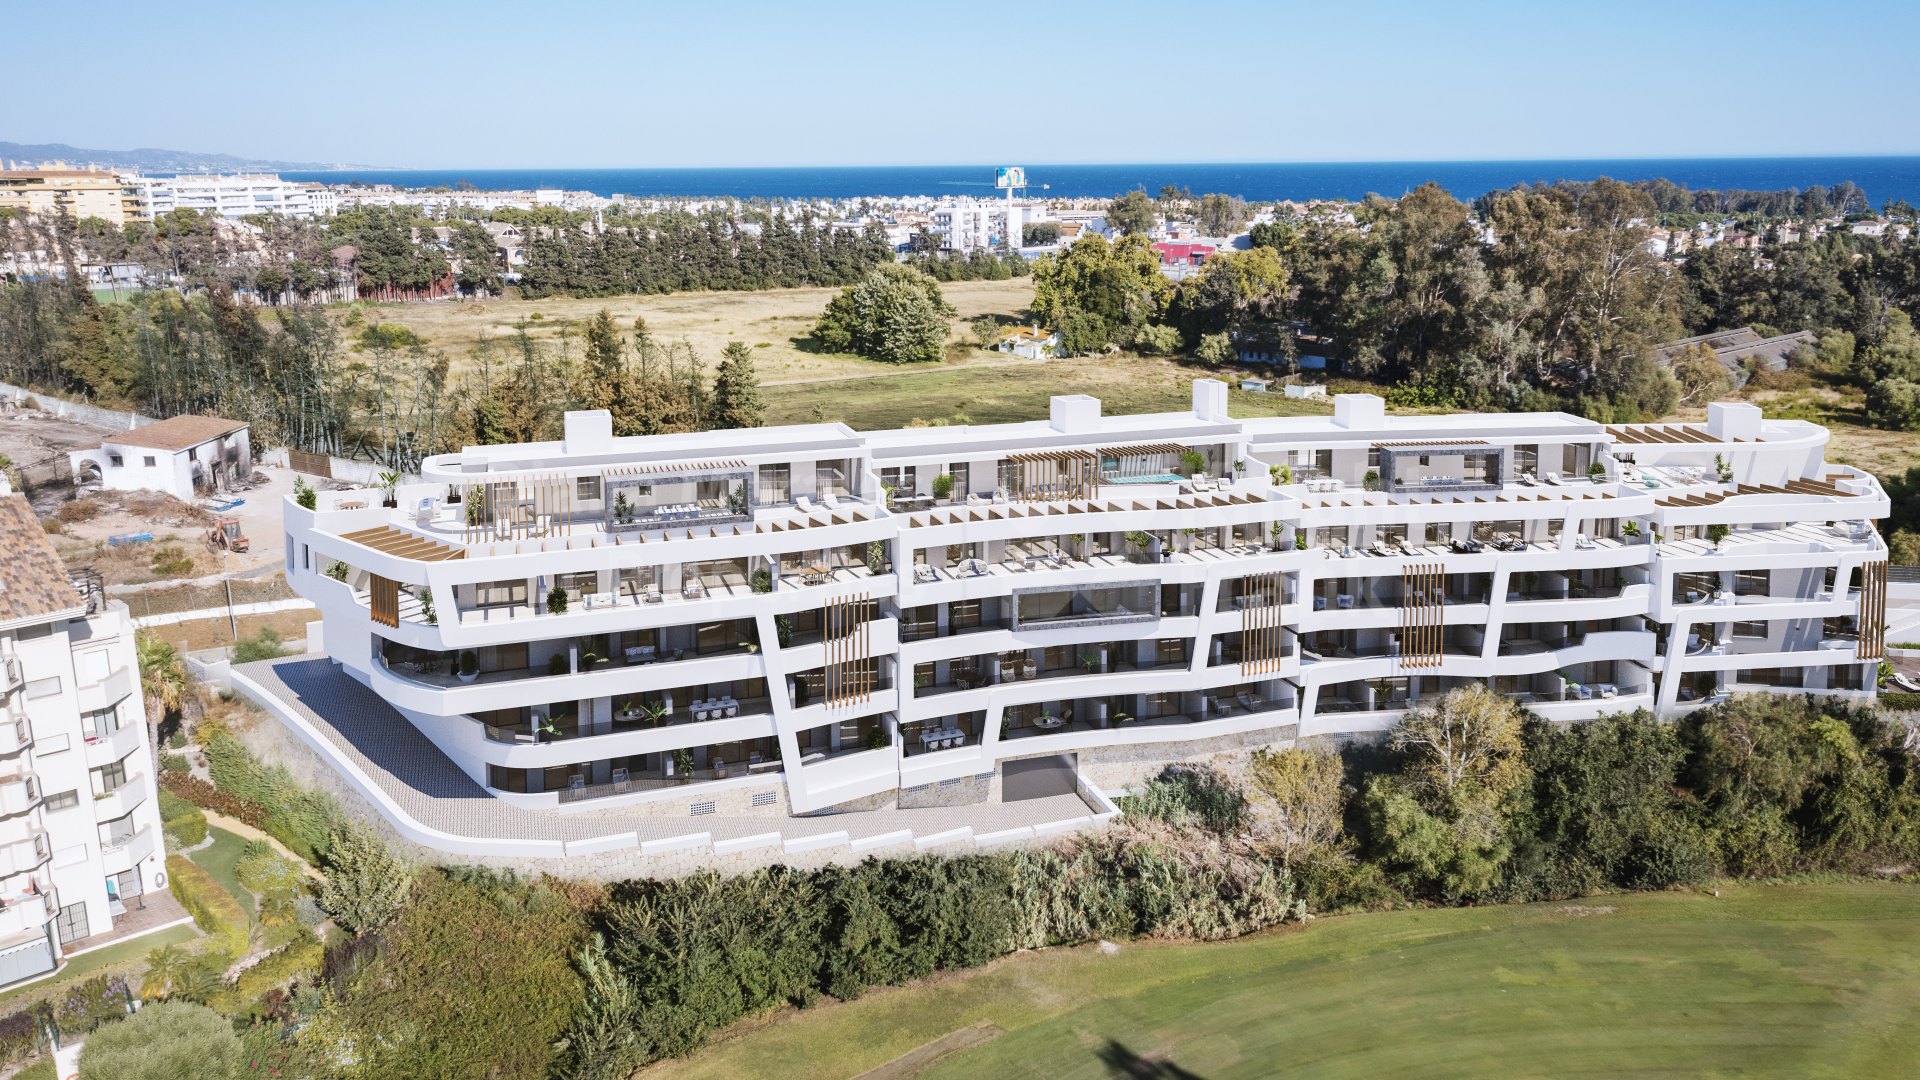 Apartments facing the 16th hole of Guadalmina Golf Course in Breeze